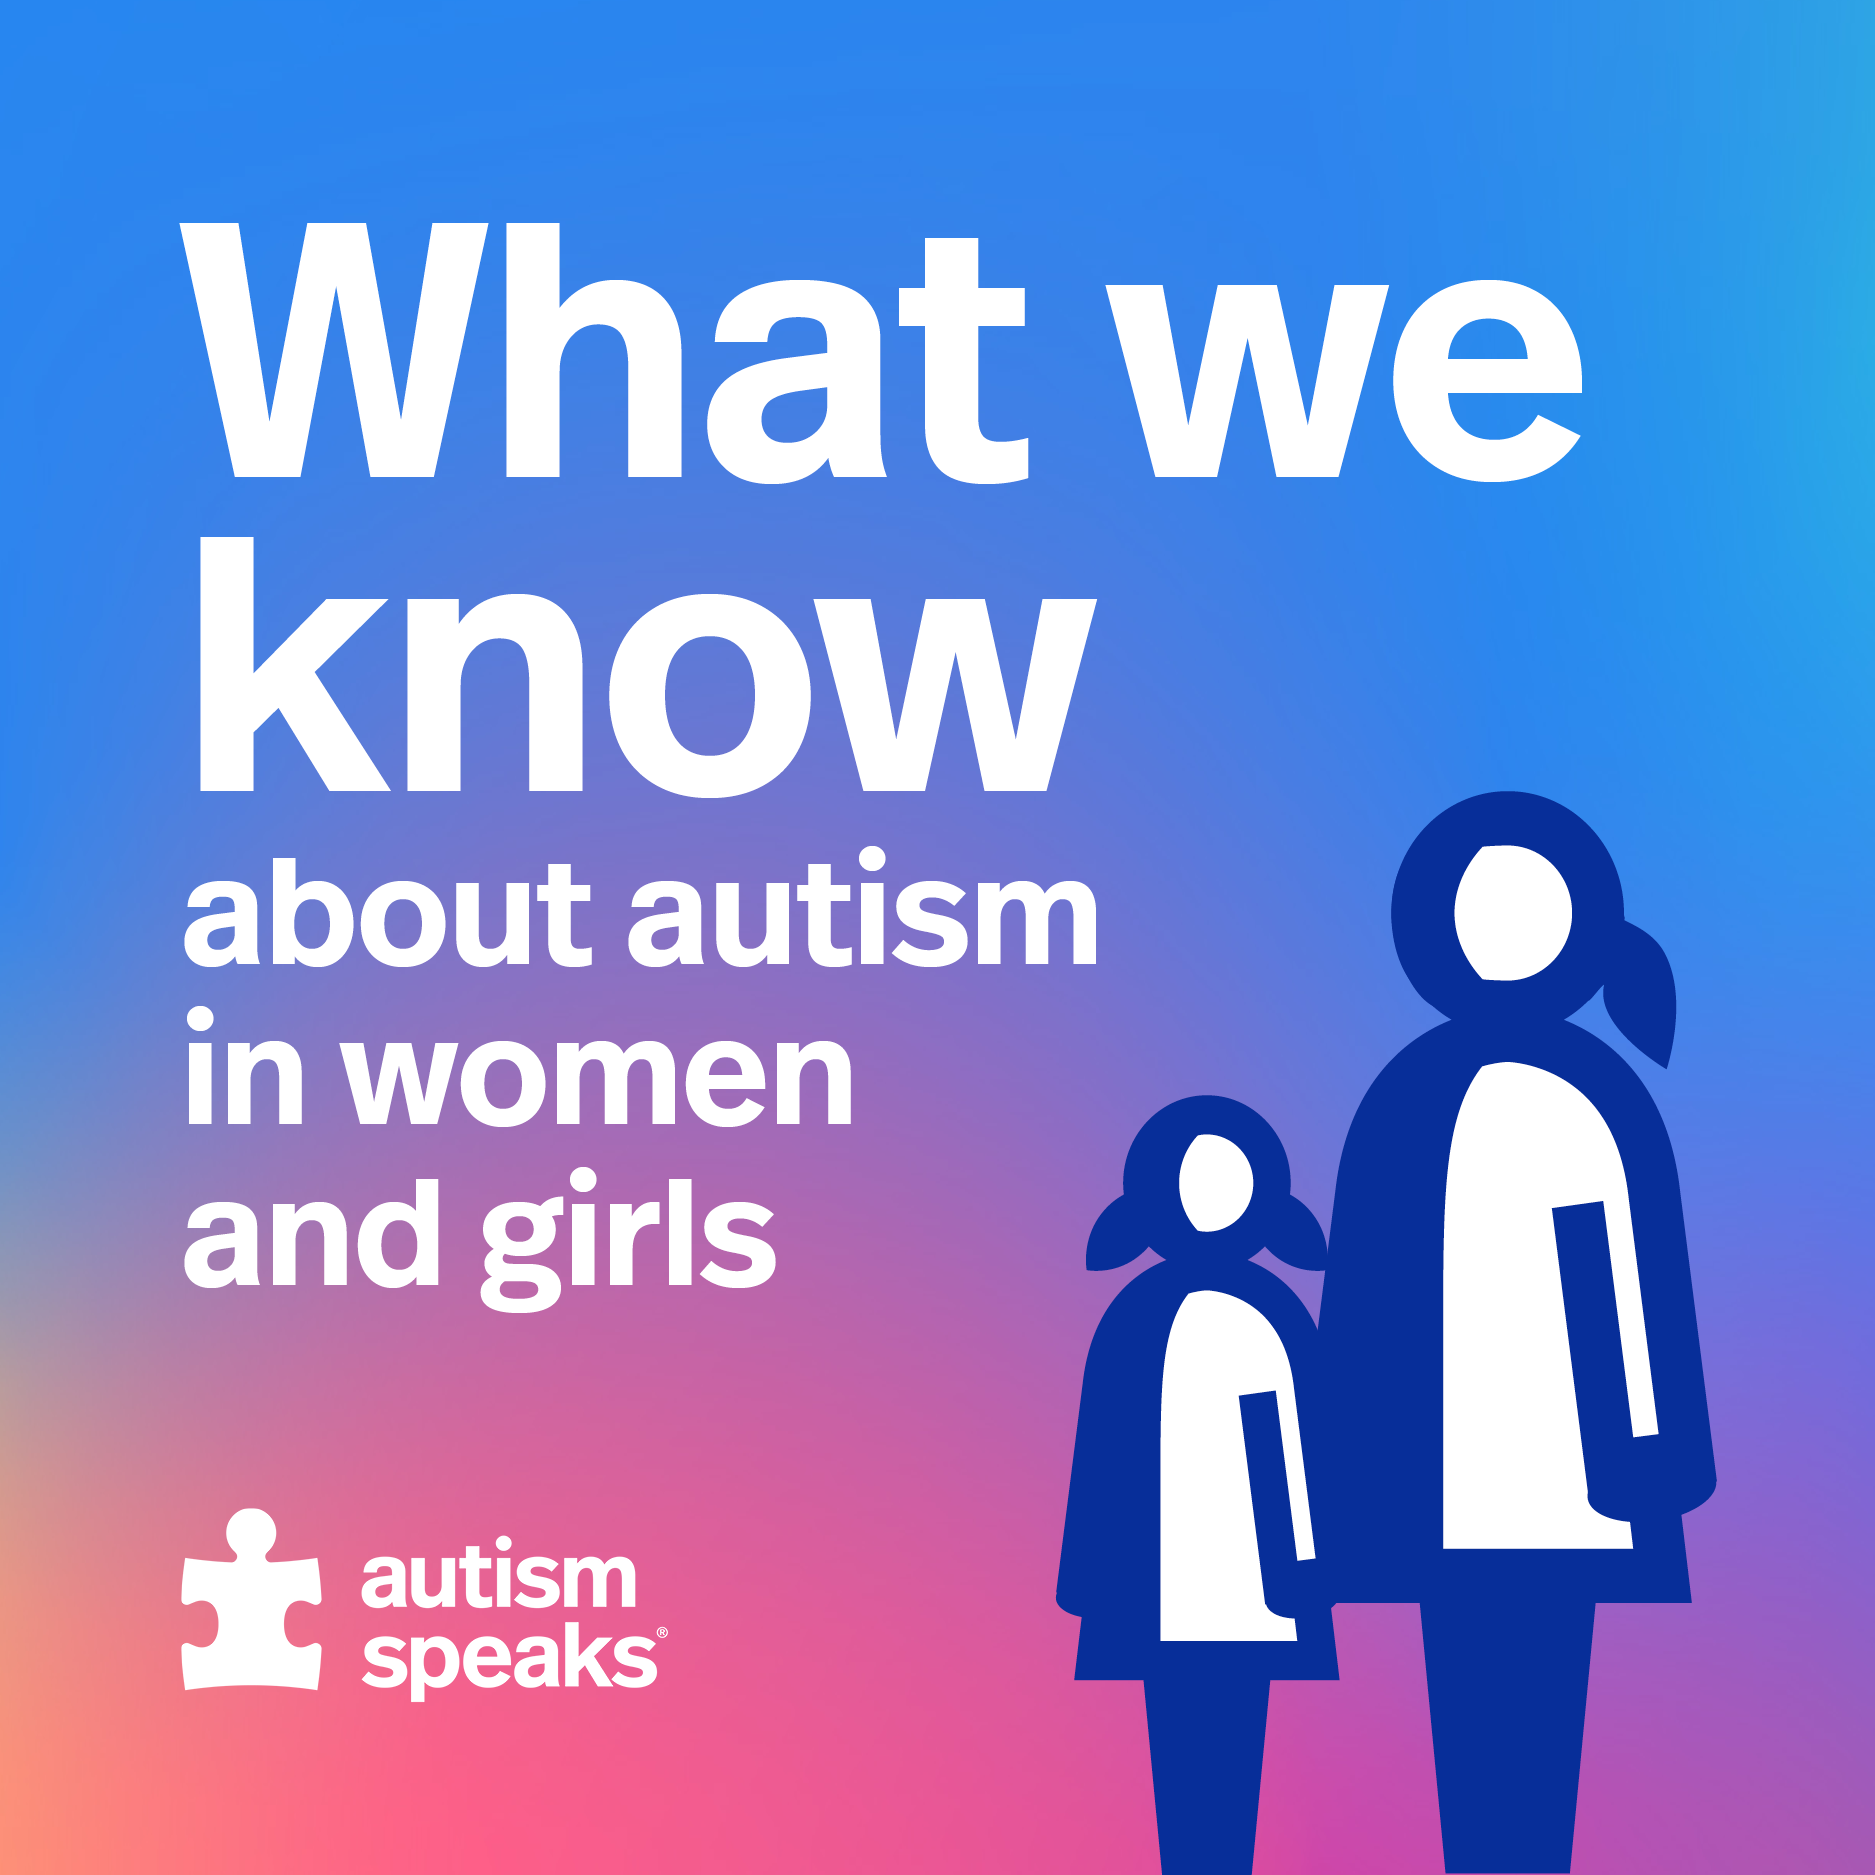 What we know about autism in women and girls